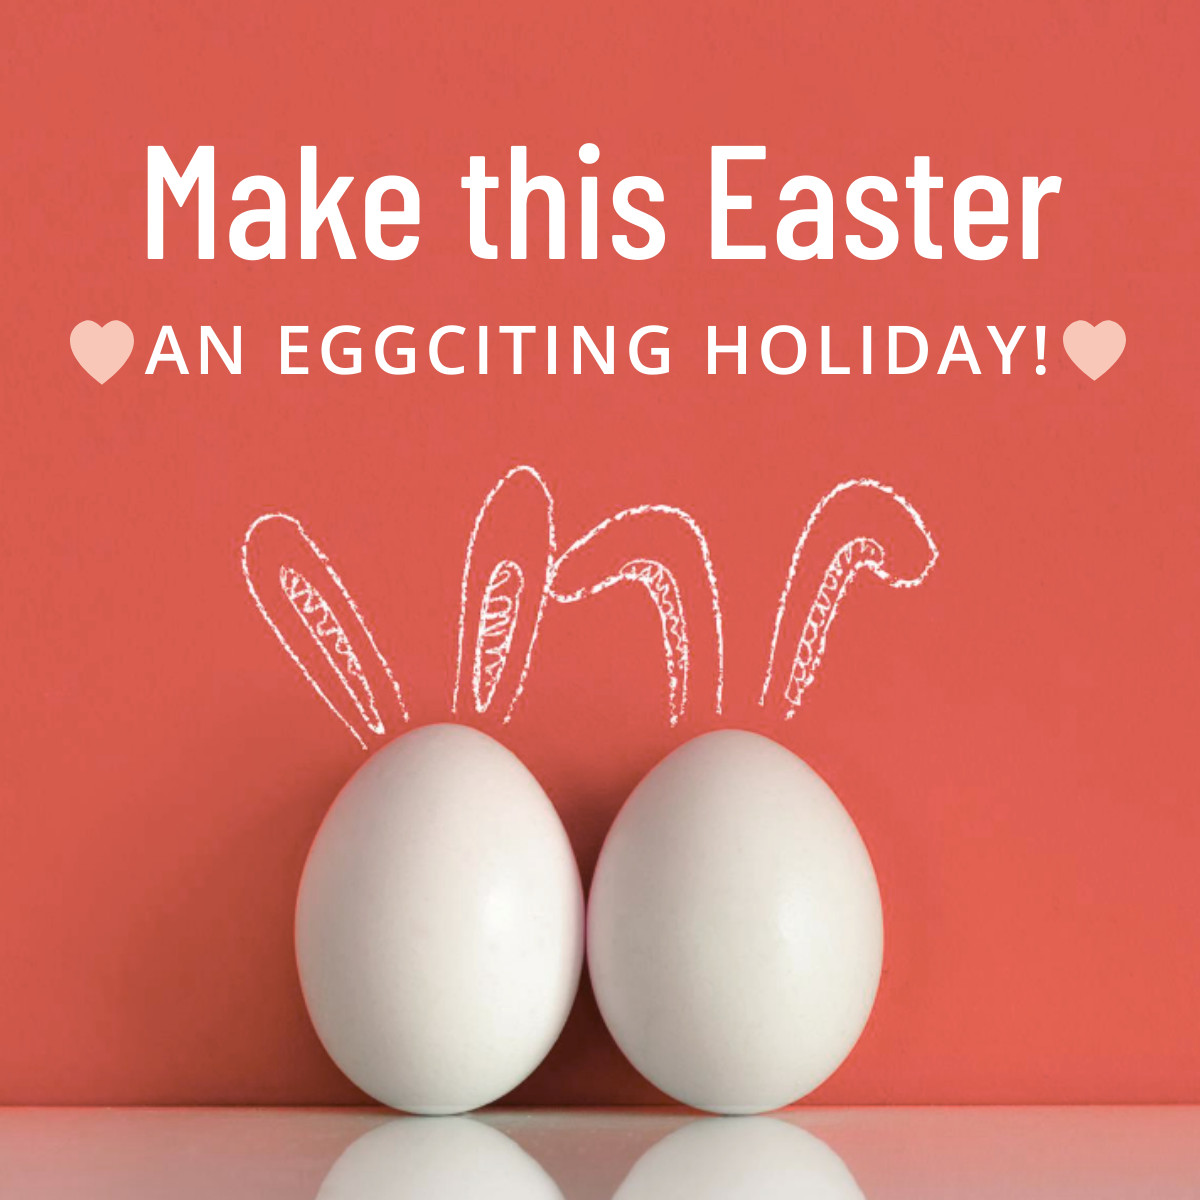 Make Easter an Eggciting Holiday